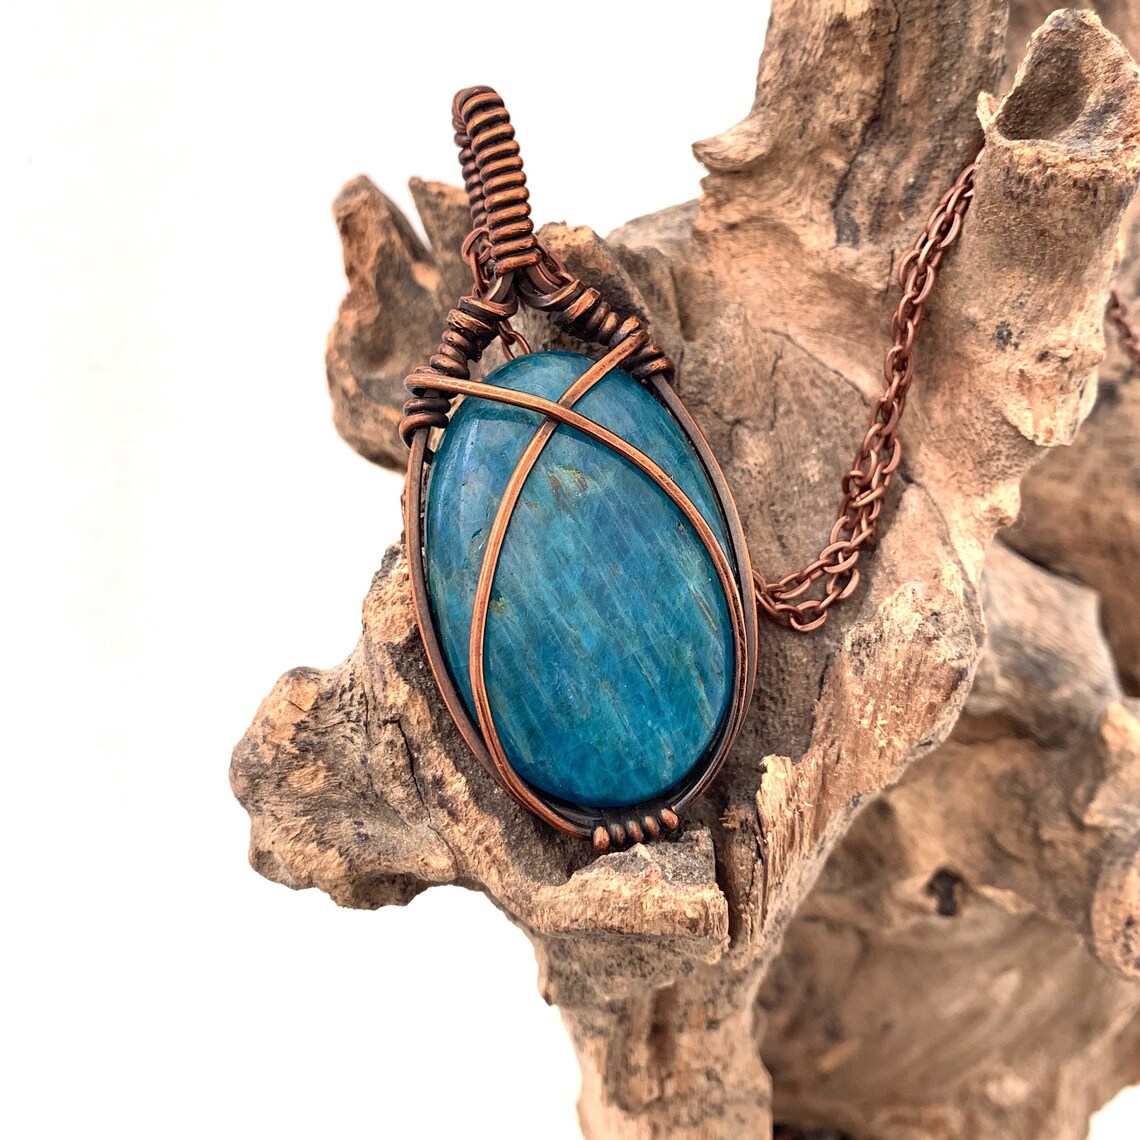 Unique, handcrafted pendant, copper wire wrapped over Apatite.

Purchase via Etsy: etsy.com/uk/listing/170…

#apatite #copper #wirewrapped #uniquejewellery #handcrafted #pendant #boholook #bohostyle #bohemianjewellery #bohemianfashion #earringsofgemstome #gemstonependant